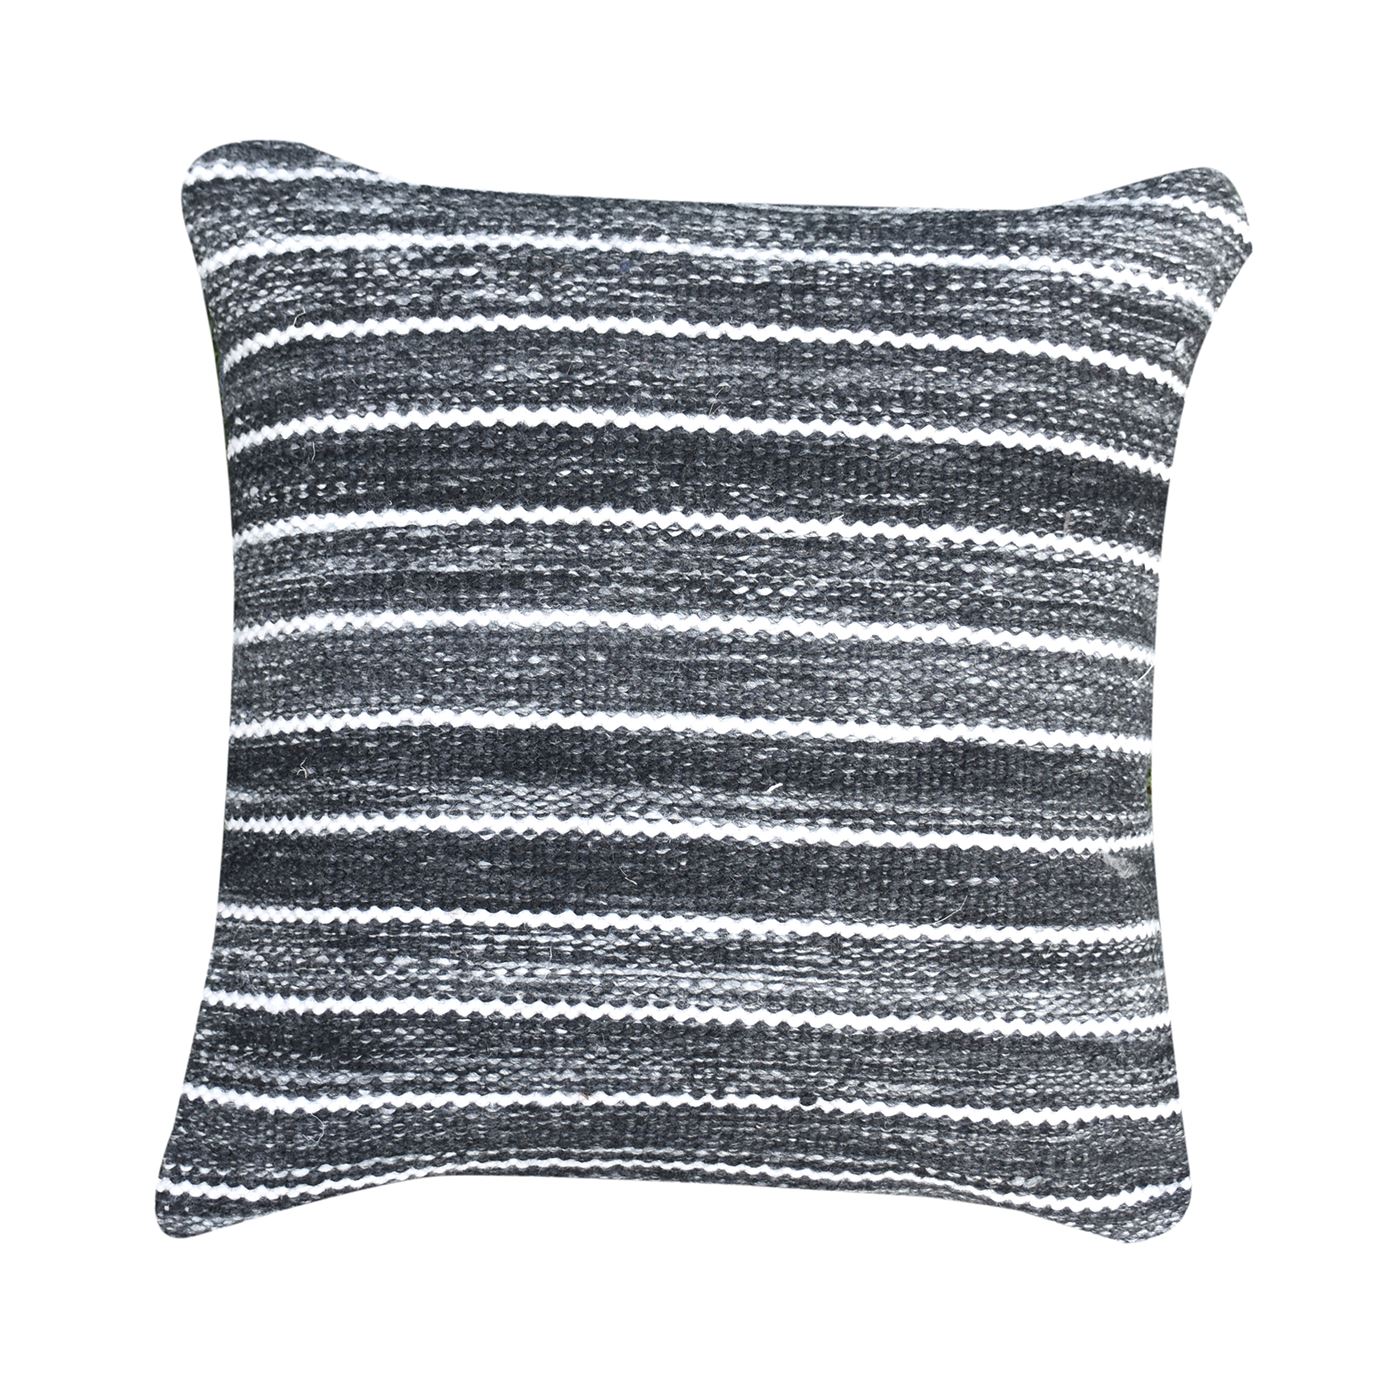 Sion Pillow, Pet, Charcoal, Pitloom, Flat Weave